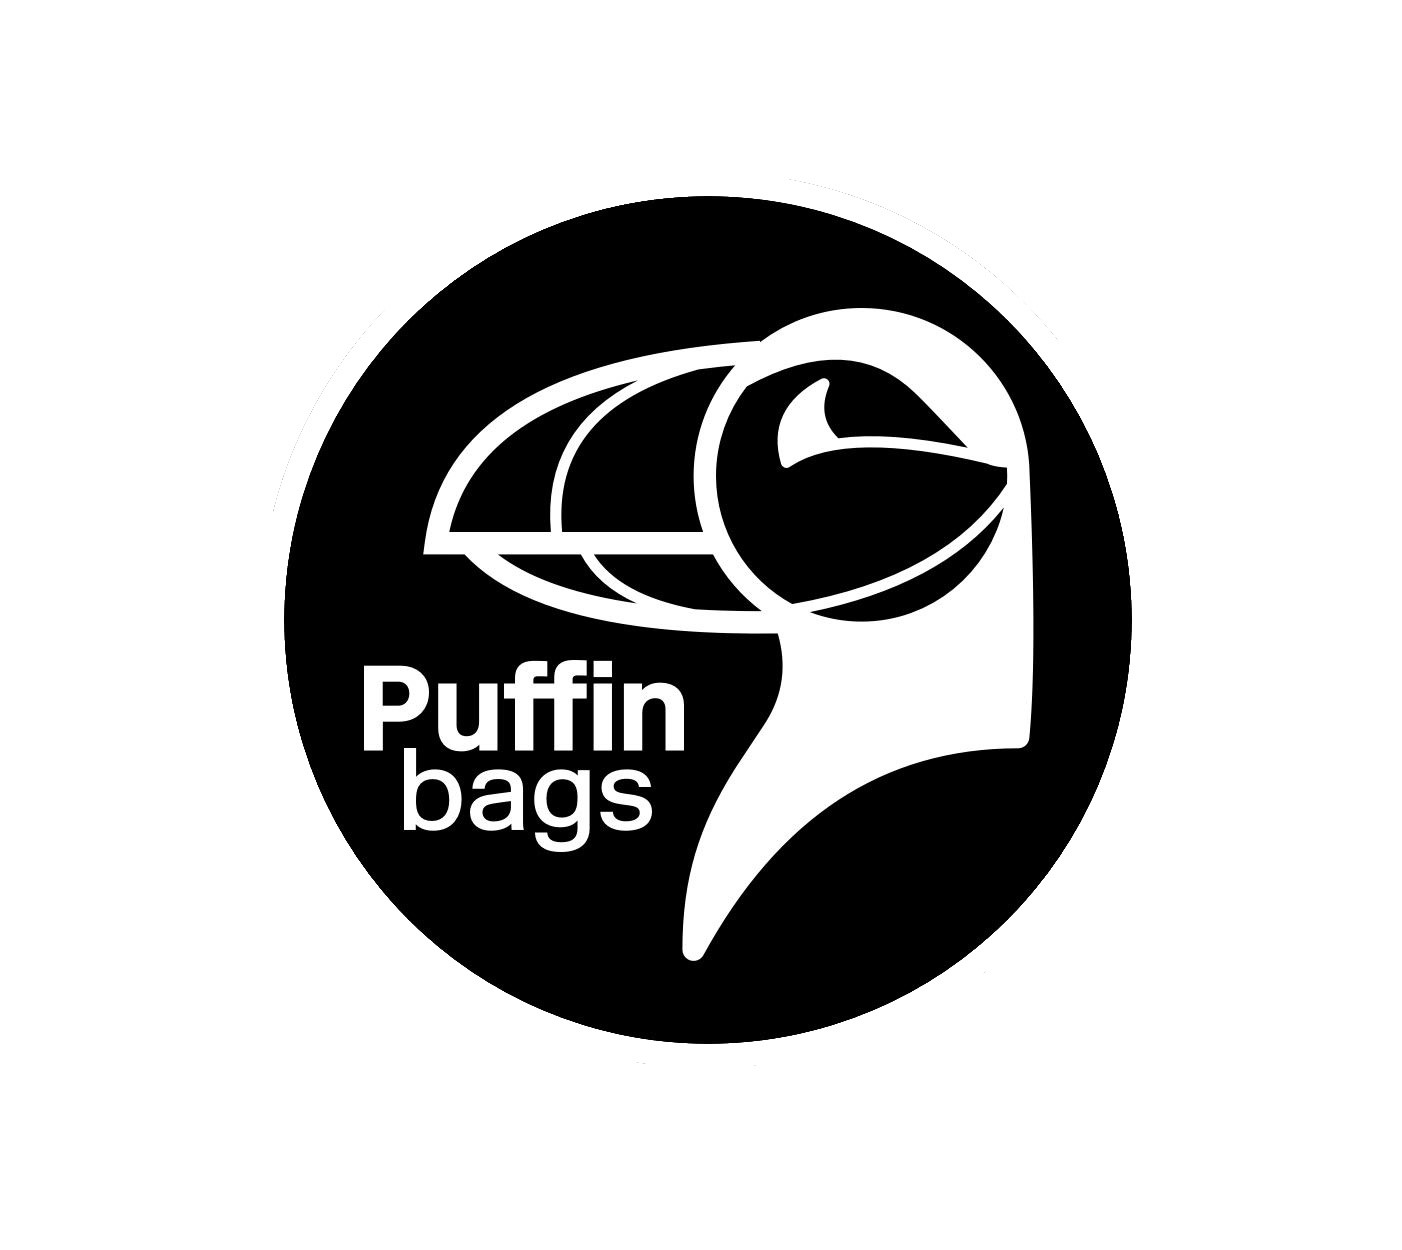 Puffin bags